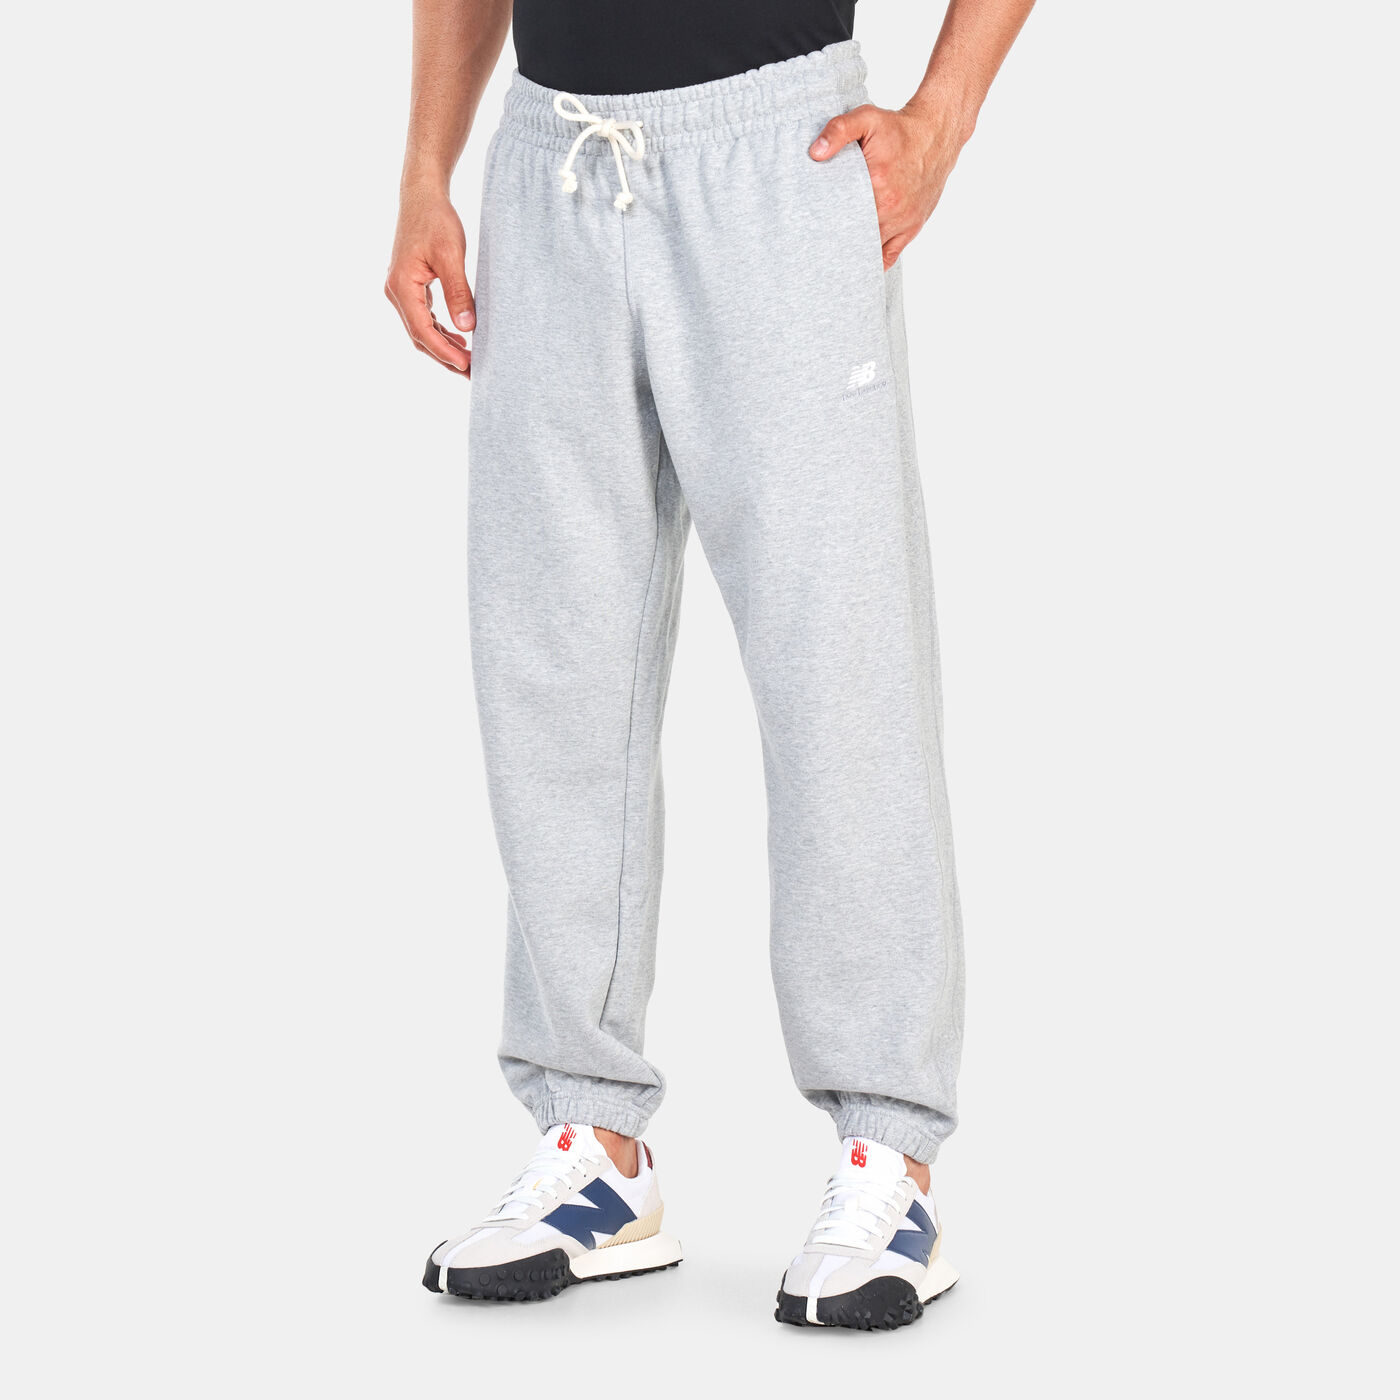 Men's Athletics Remastered French Terry Sweatpants